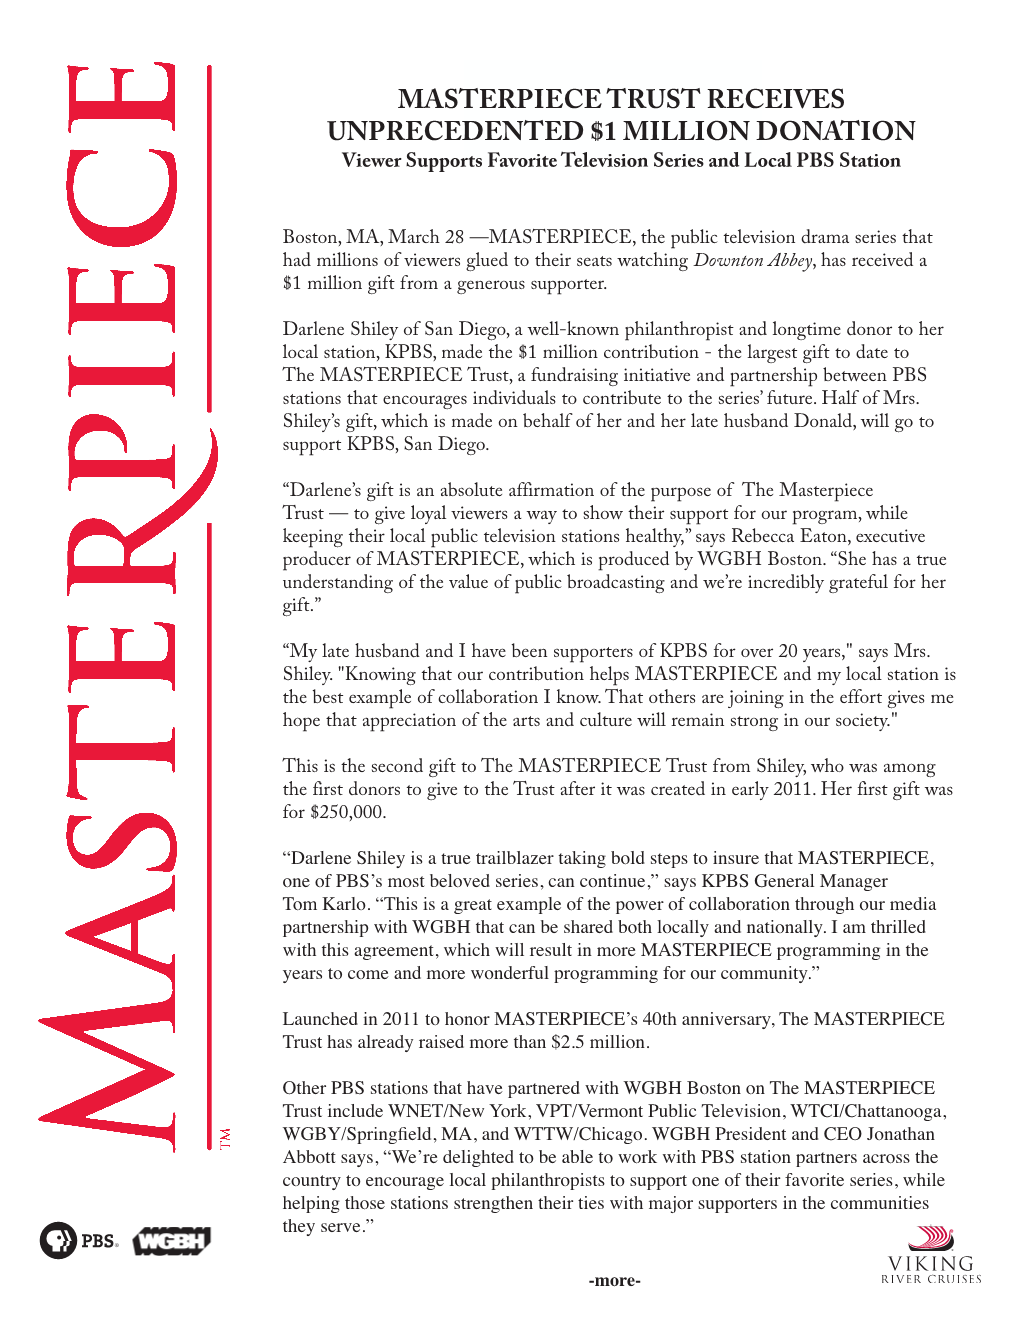 MASTERPIECE TRUST RECEIVES UNPRECEDENTED $1 MILLION DONATION Viewer Supports Favorite Television Series and Local PBS Station